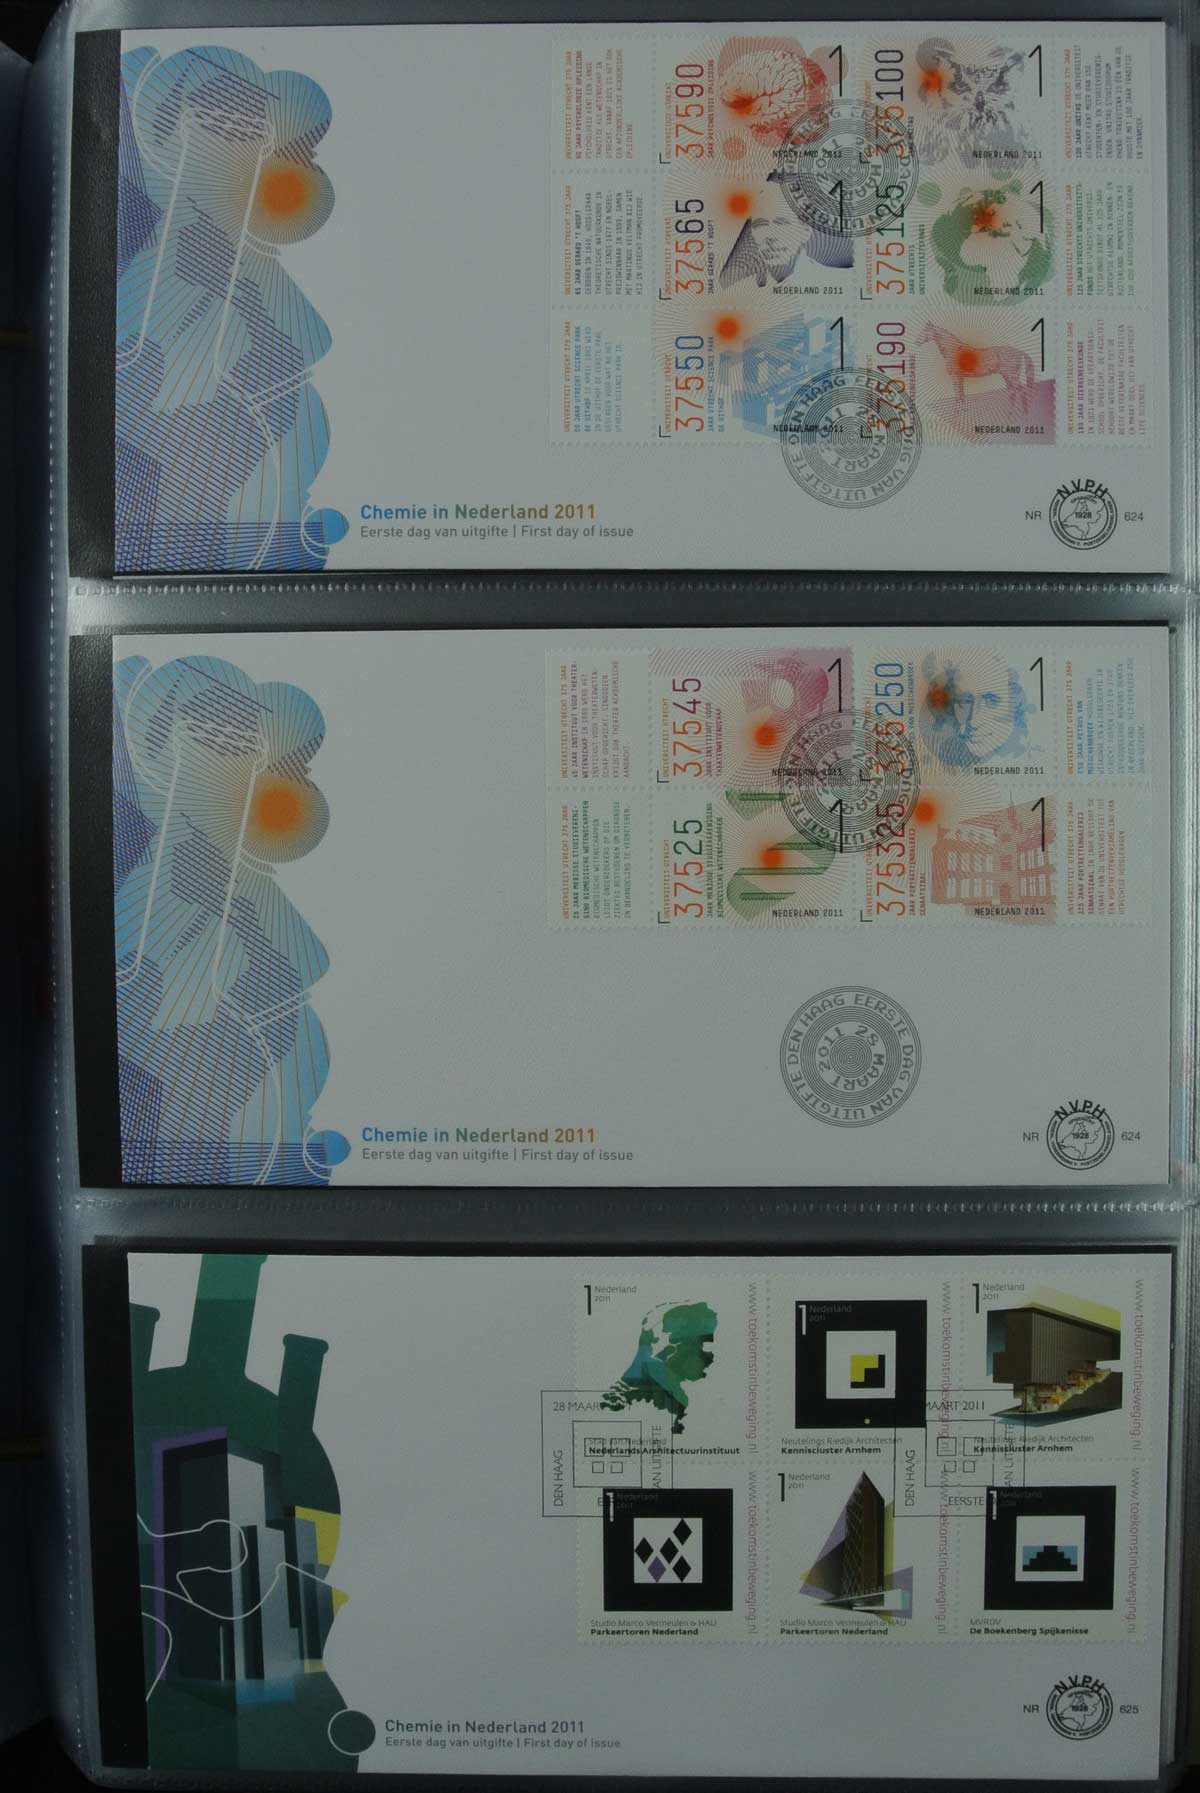 26836 125 - 26836 Netherlands FDC's 1995-2012.